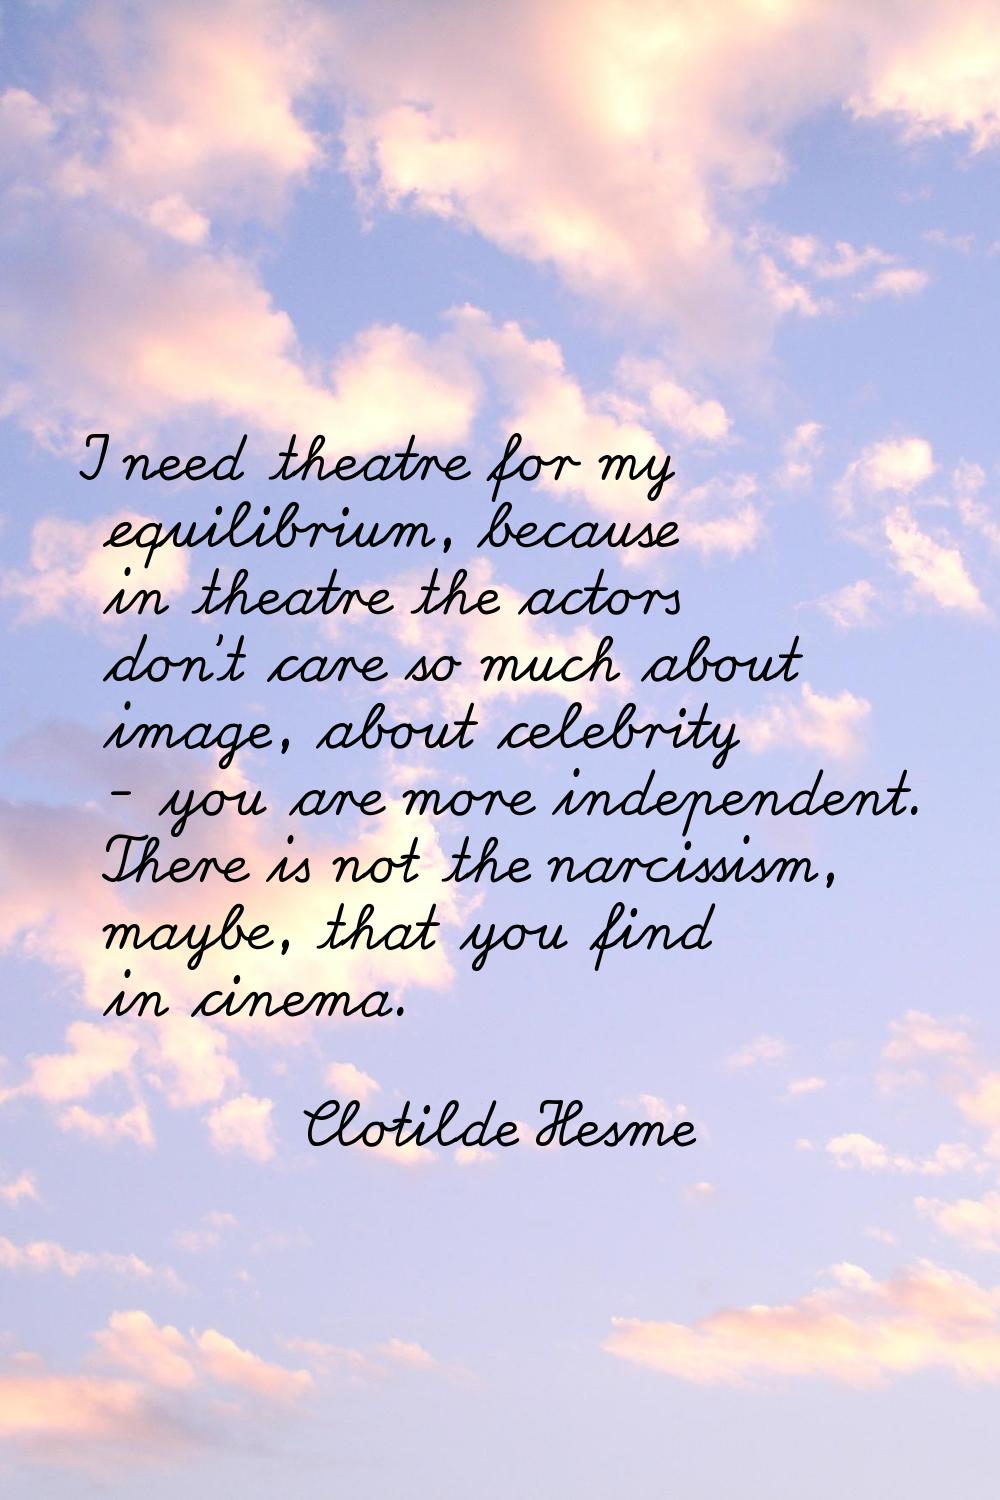 I need theatre for my equilibrium, because in theatre the actors don't care so much about image, ab